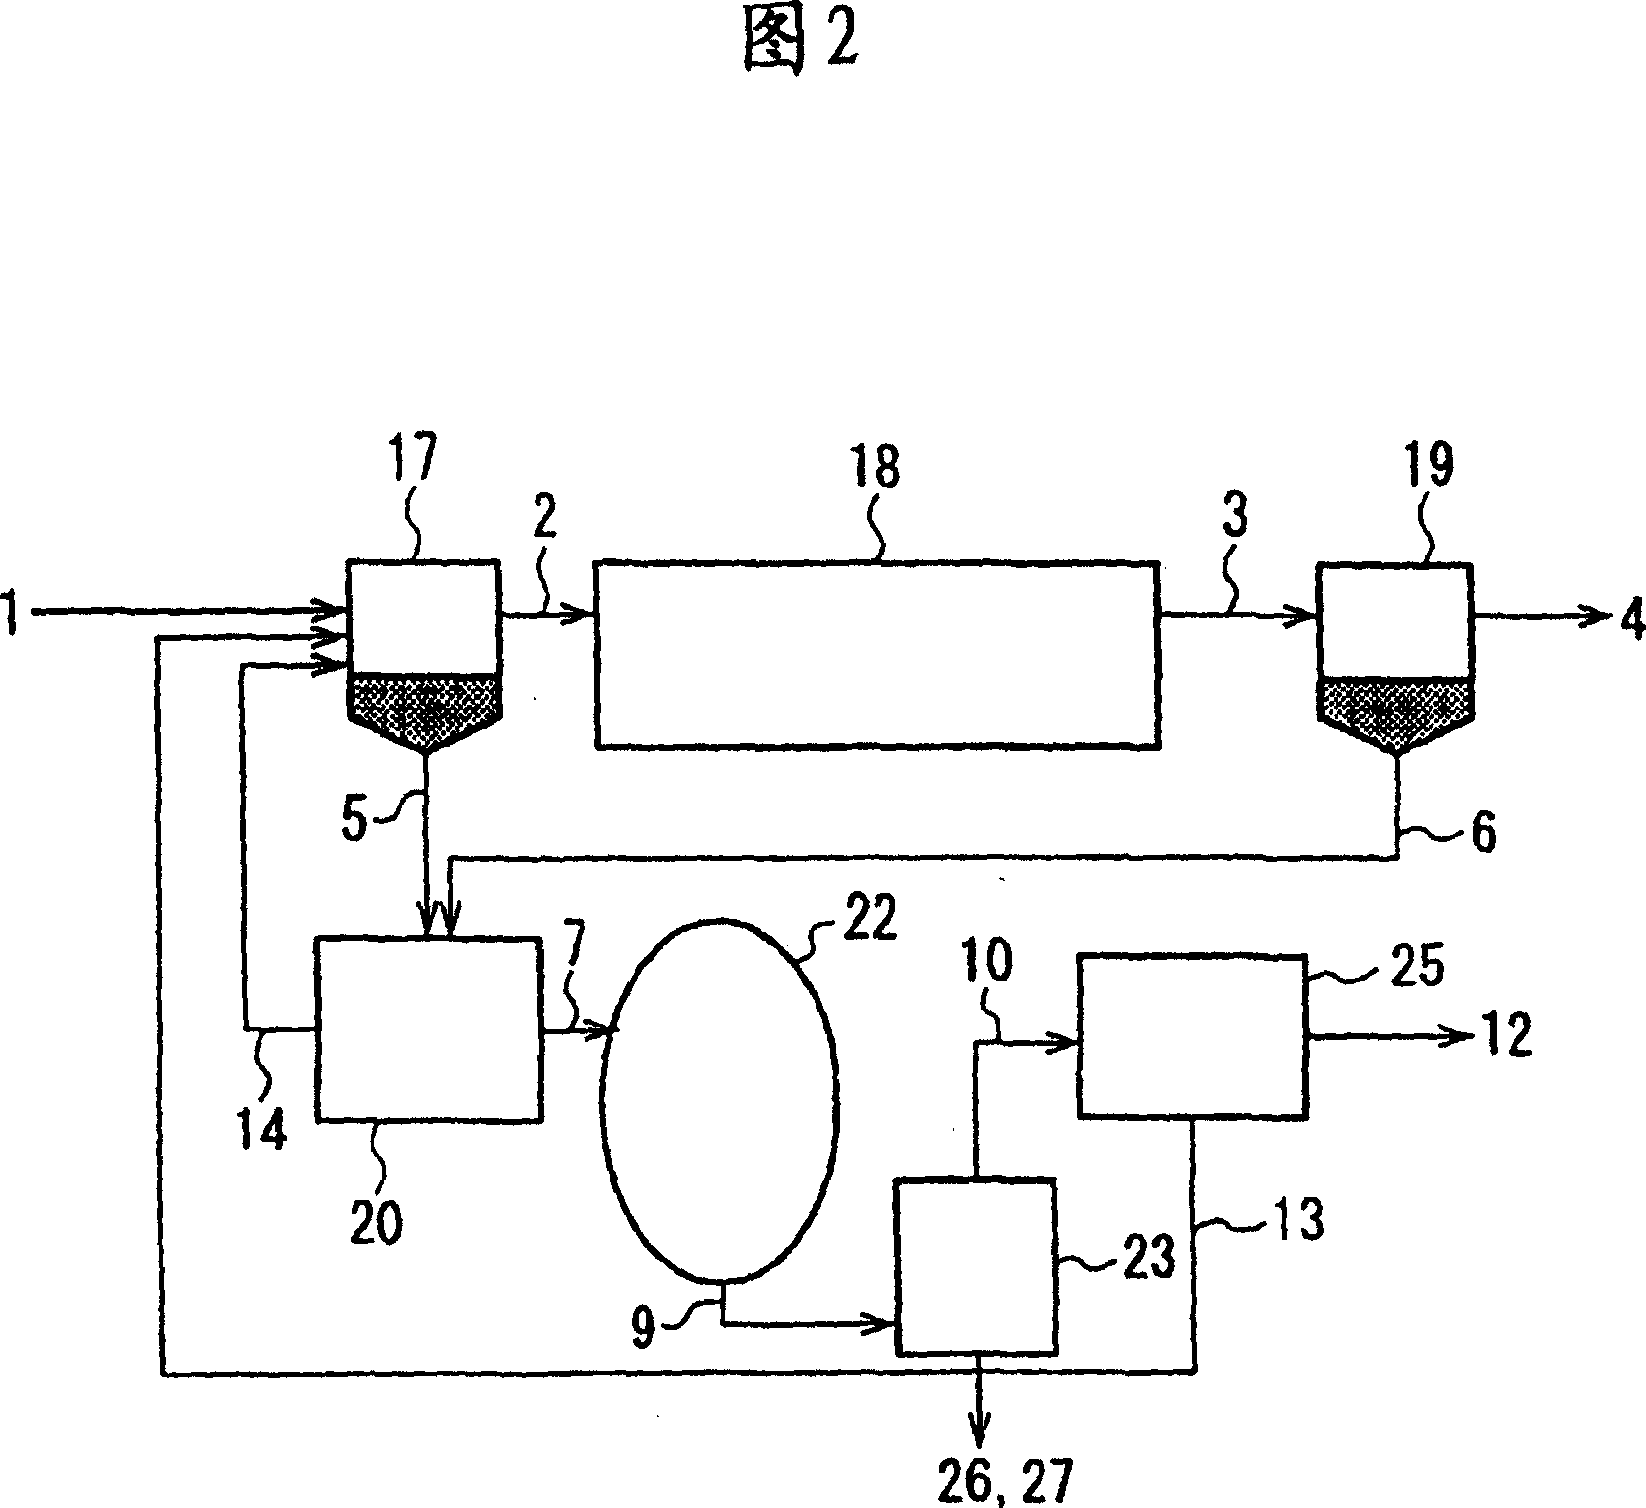 Method and apparatus for treating organic drainage and sludge